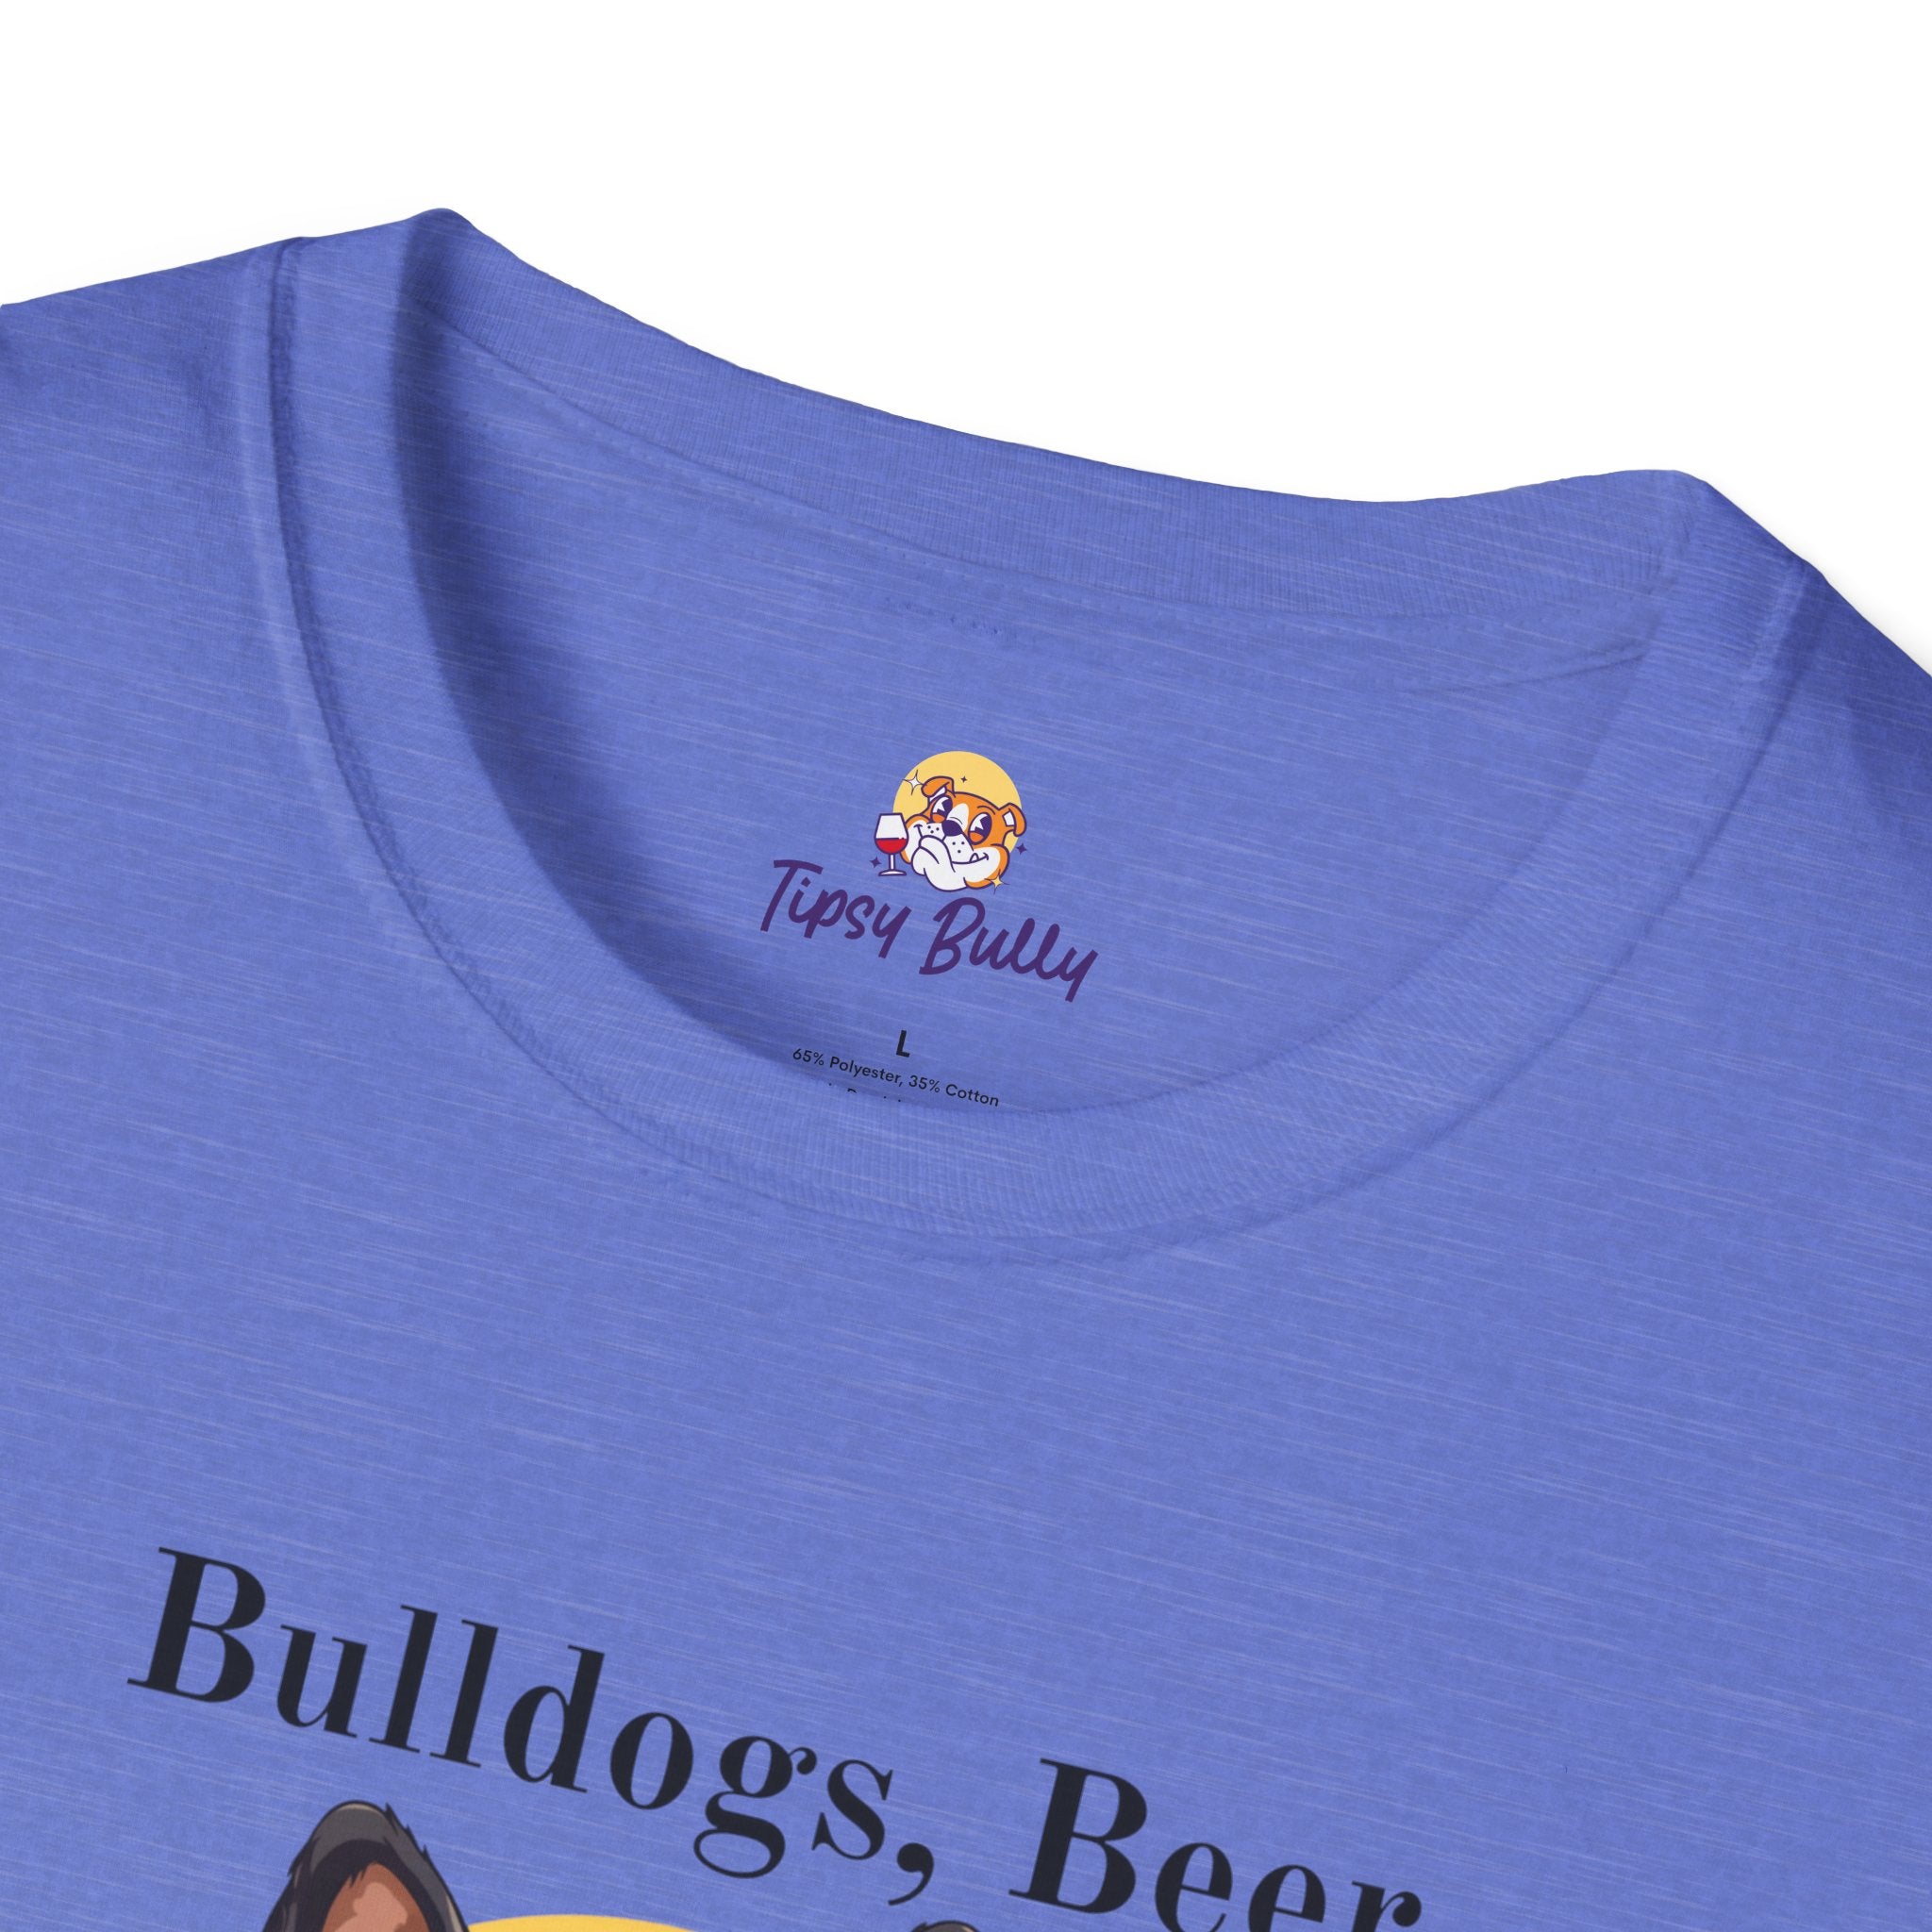 Bulldogs, Beer, and Bad Decisions" Unisex T-Shirt by Tipsy Bully (French/Black)